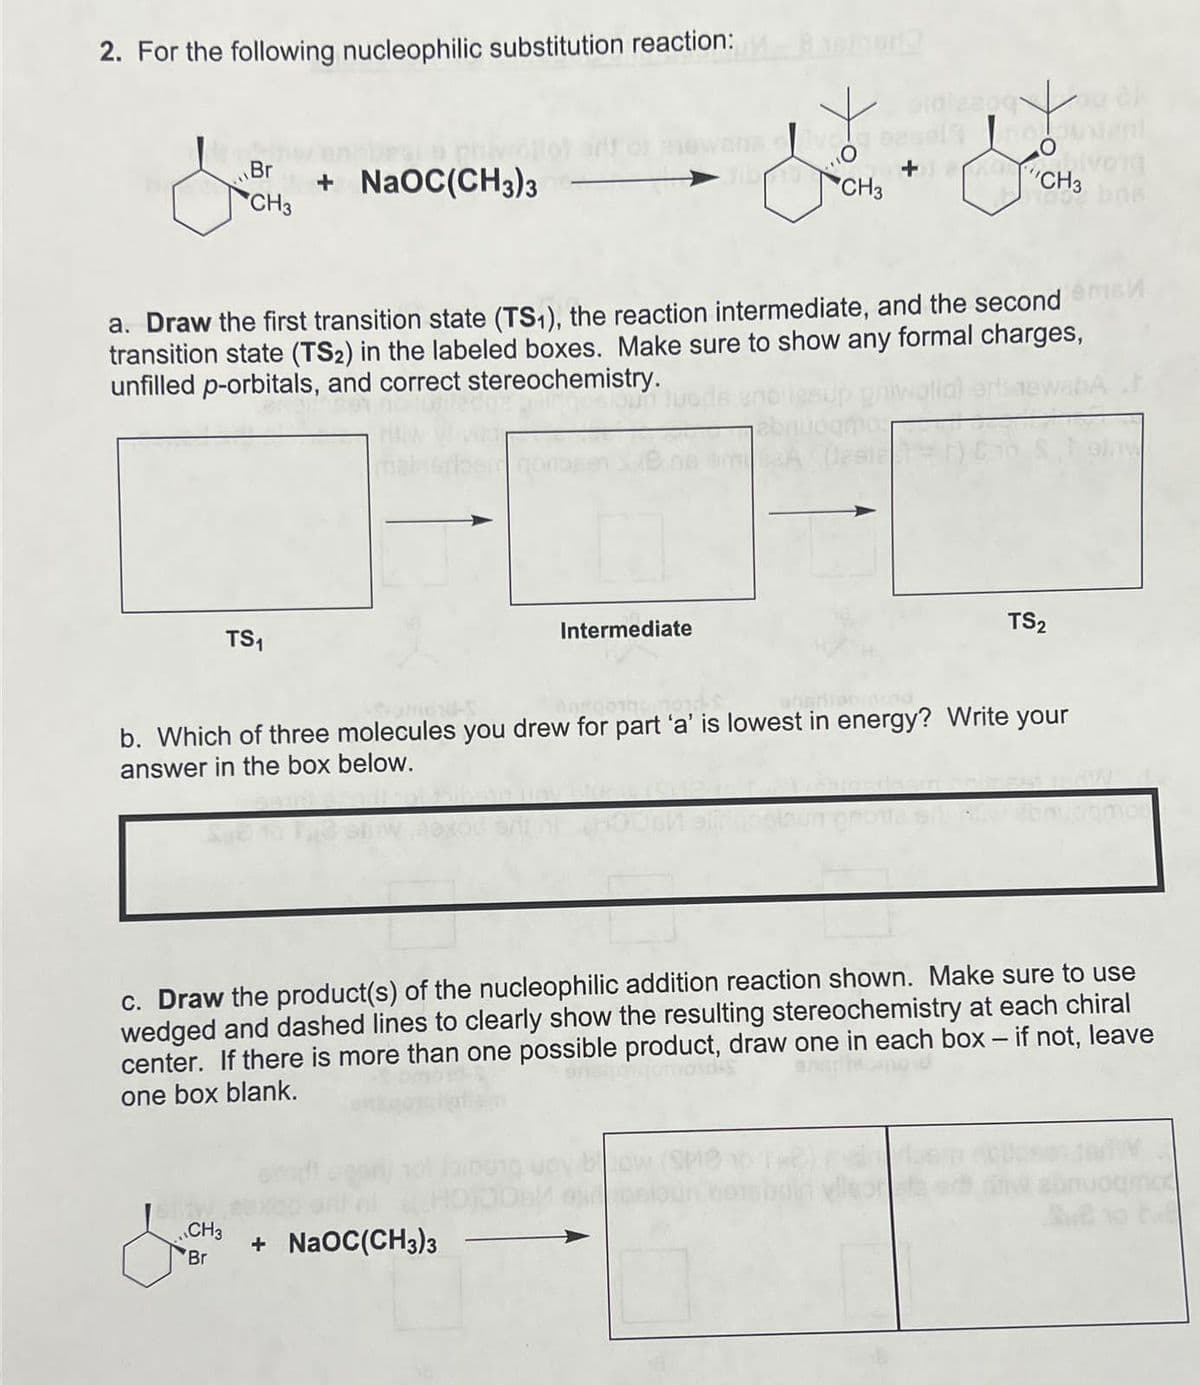 2. For the following nucleophilic substitution reaction:
NaOC(CH3)3
CH3
'CH3
CH3
a. Draw the first transition state (TS1), the reaction intermediate, and the second m
transition state (TS2) in the labeled boxes. Make sure to show any formal charges,
unfilled p-orbitals, and correct stereochemistry.
TS₁
41001
Intermediate
ogmos
TS2
amond-
b. Which of three molecules you drew for part 'a' is lowest in energy? Write your
answer in the box below.
c. Draw the product(s) of the nucleophilic addition reaction shown. Make sure to use
wedged and dashed lines to clearly show the resulting stereochemistry at each chiral
center. If there is more than one possible product, draw one in each box - if not, leave
one box blank.
CH3
Br
+ NaOC(CH3)3